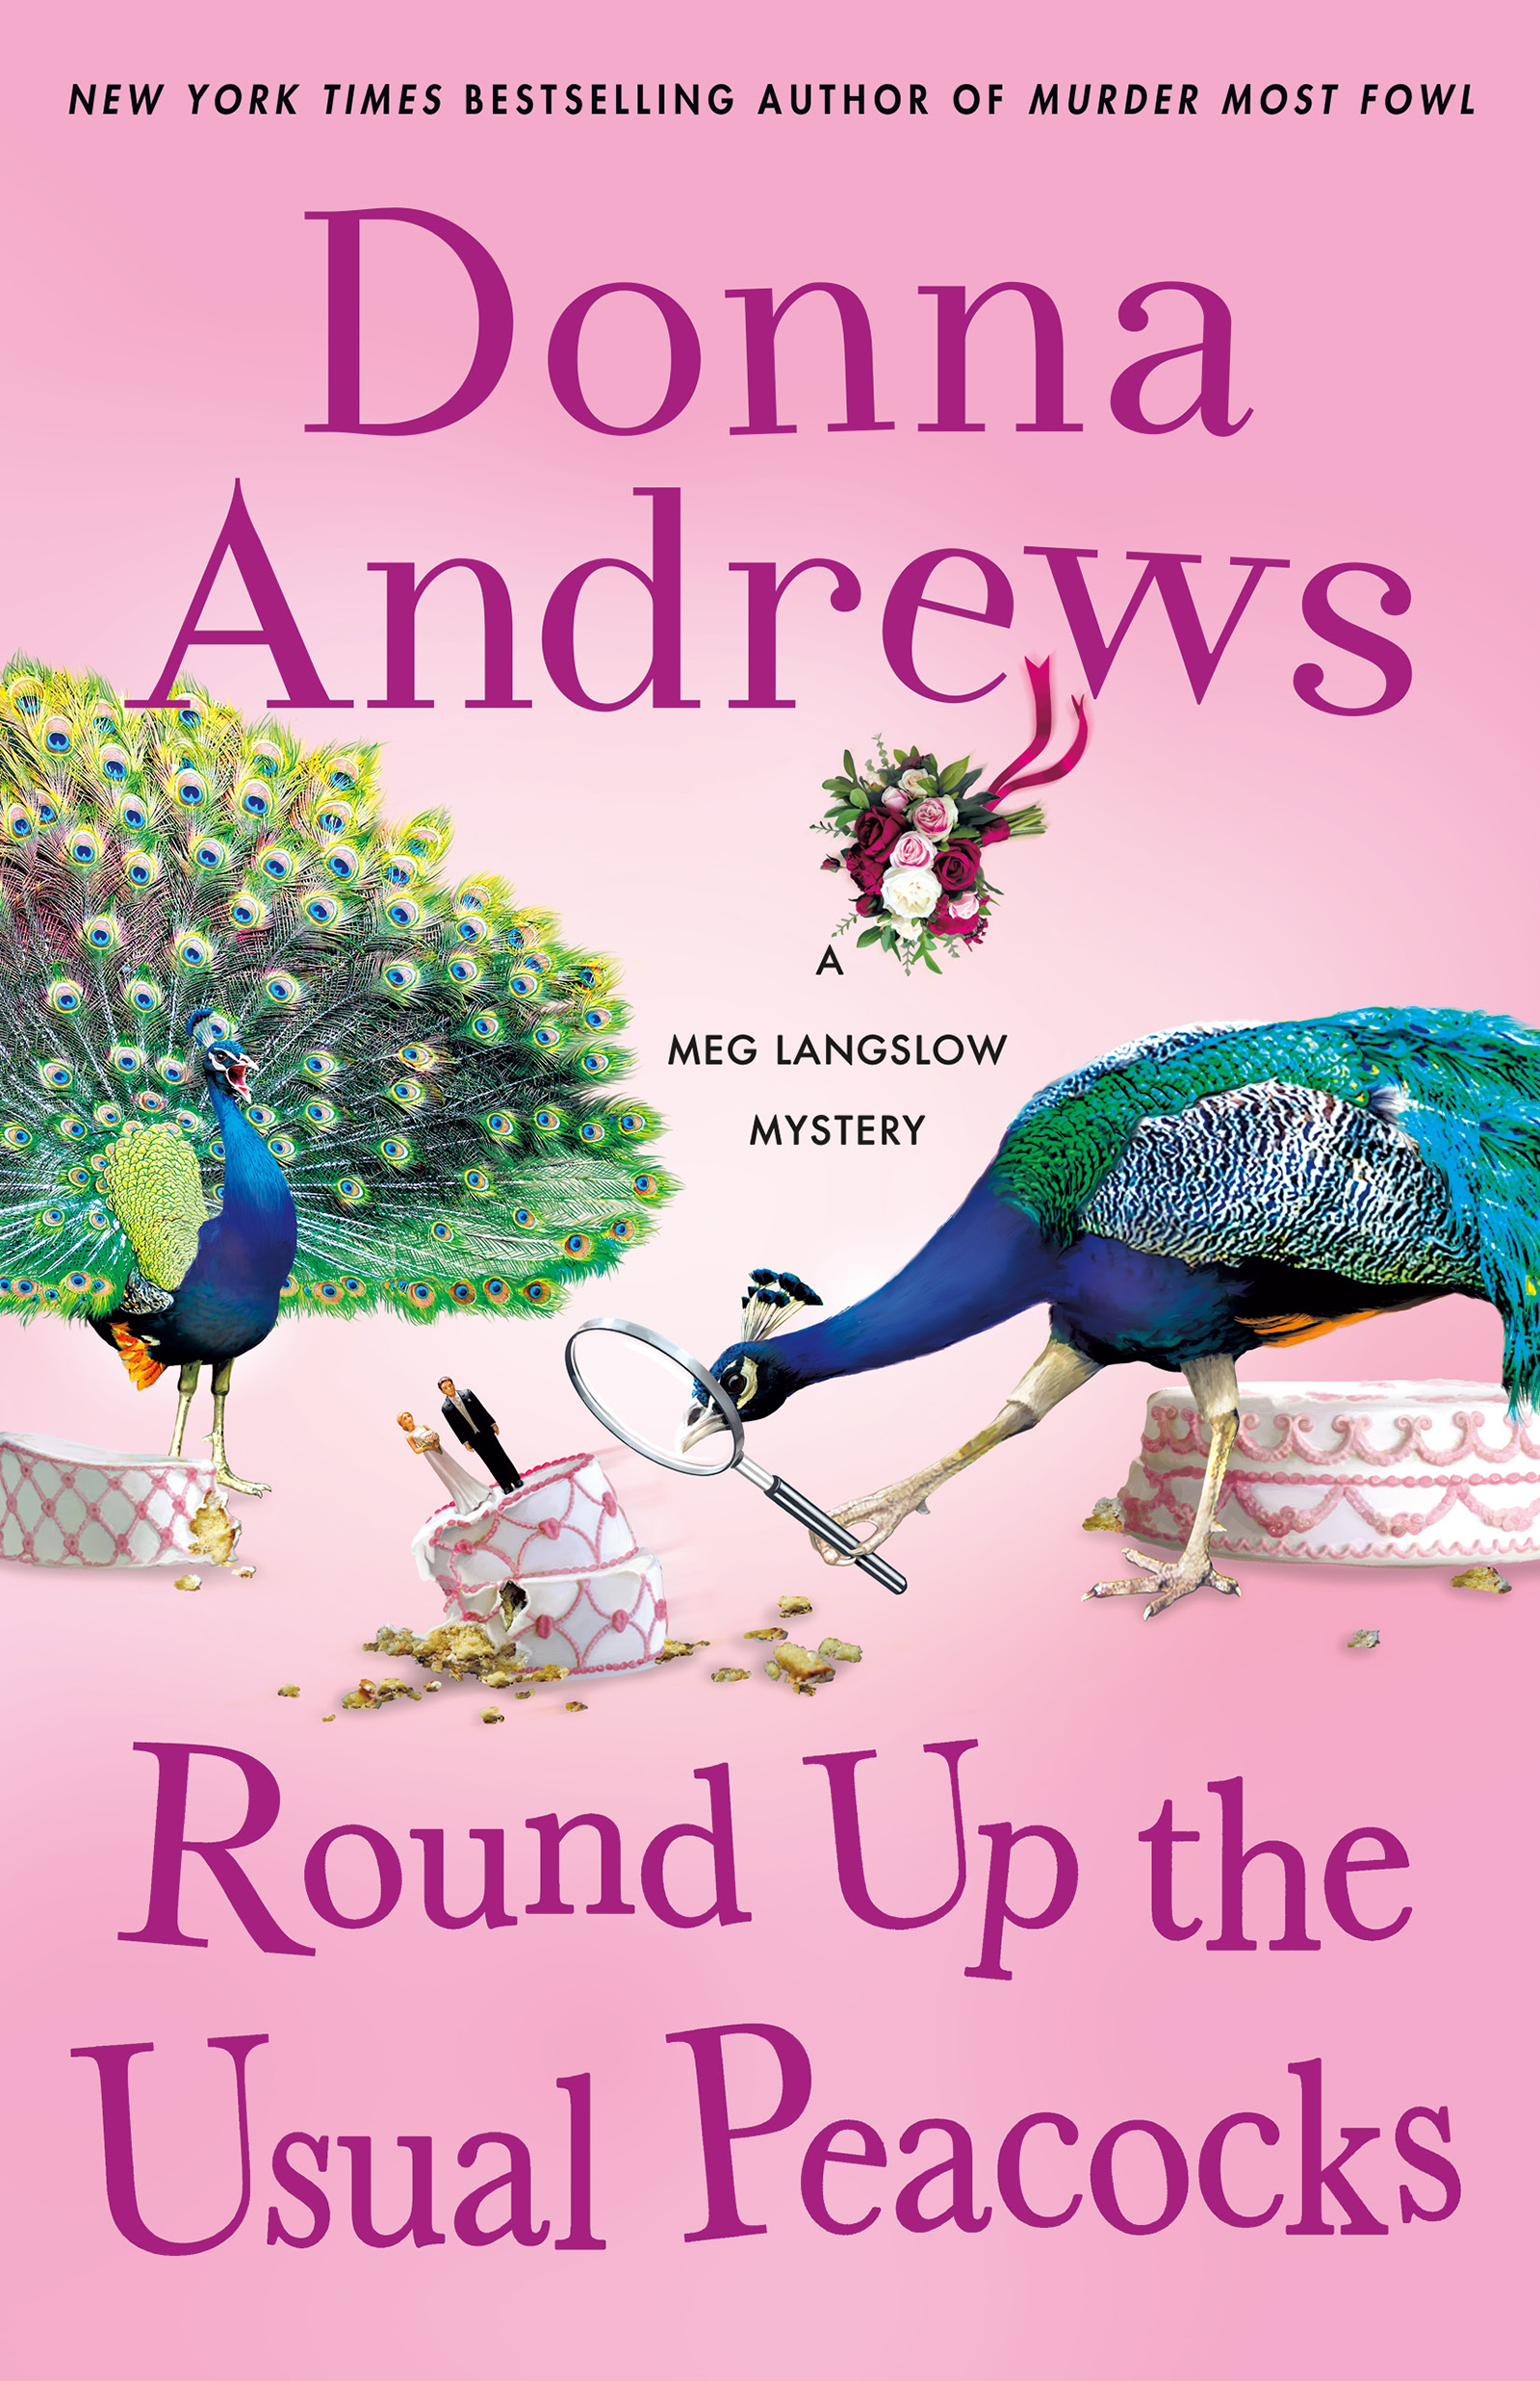 Round Up the Usual Peacocks--A Meg Langslow Mystery